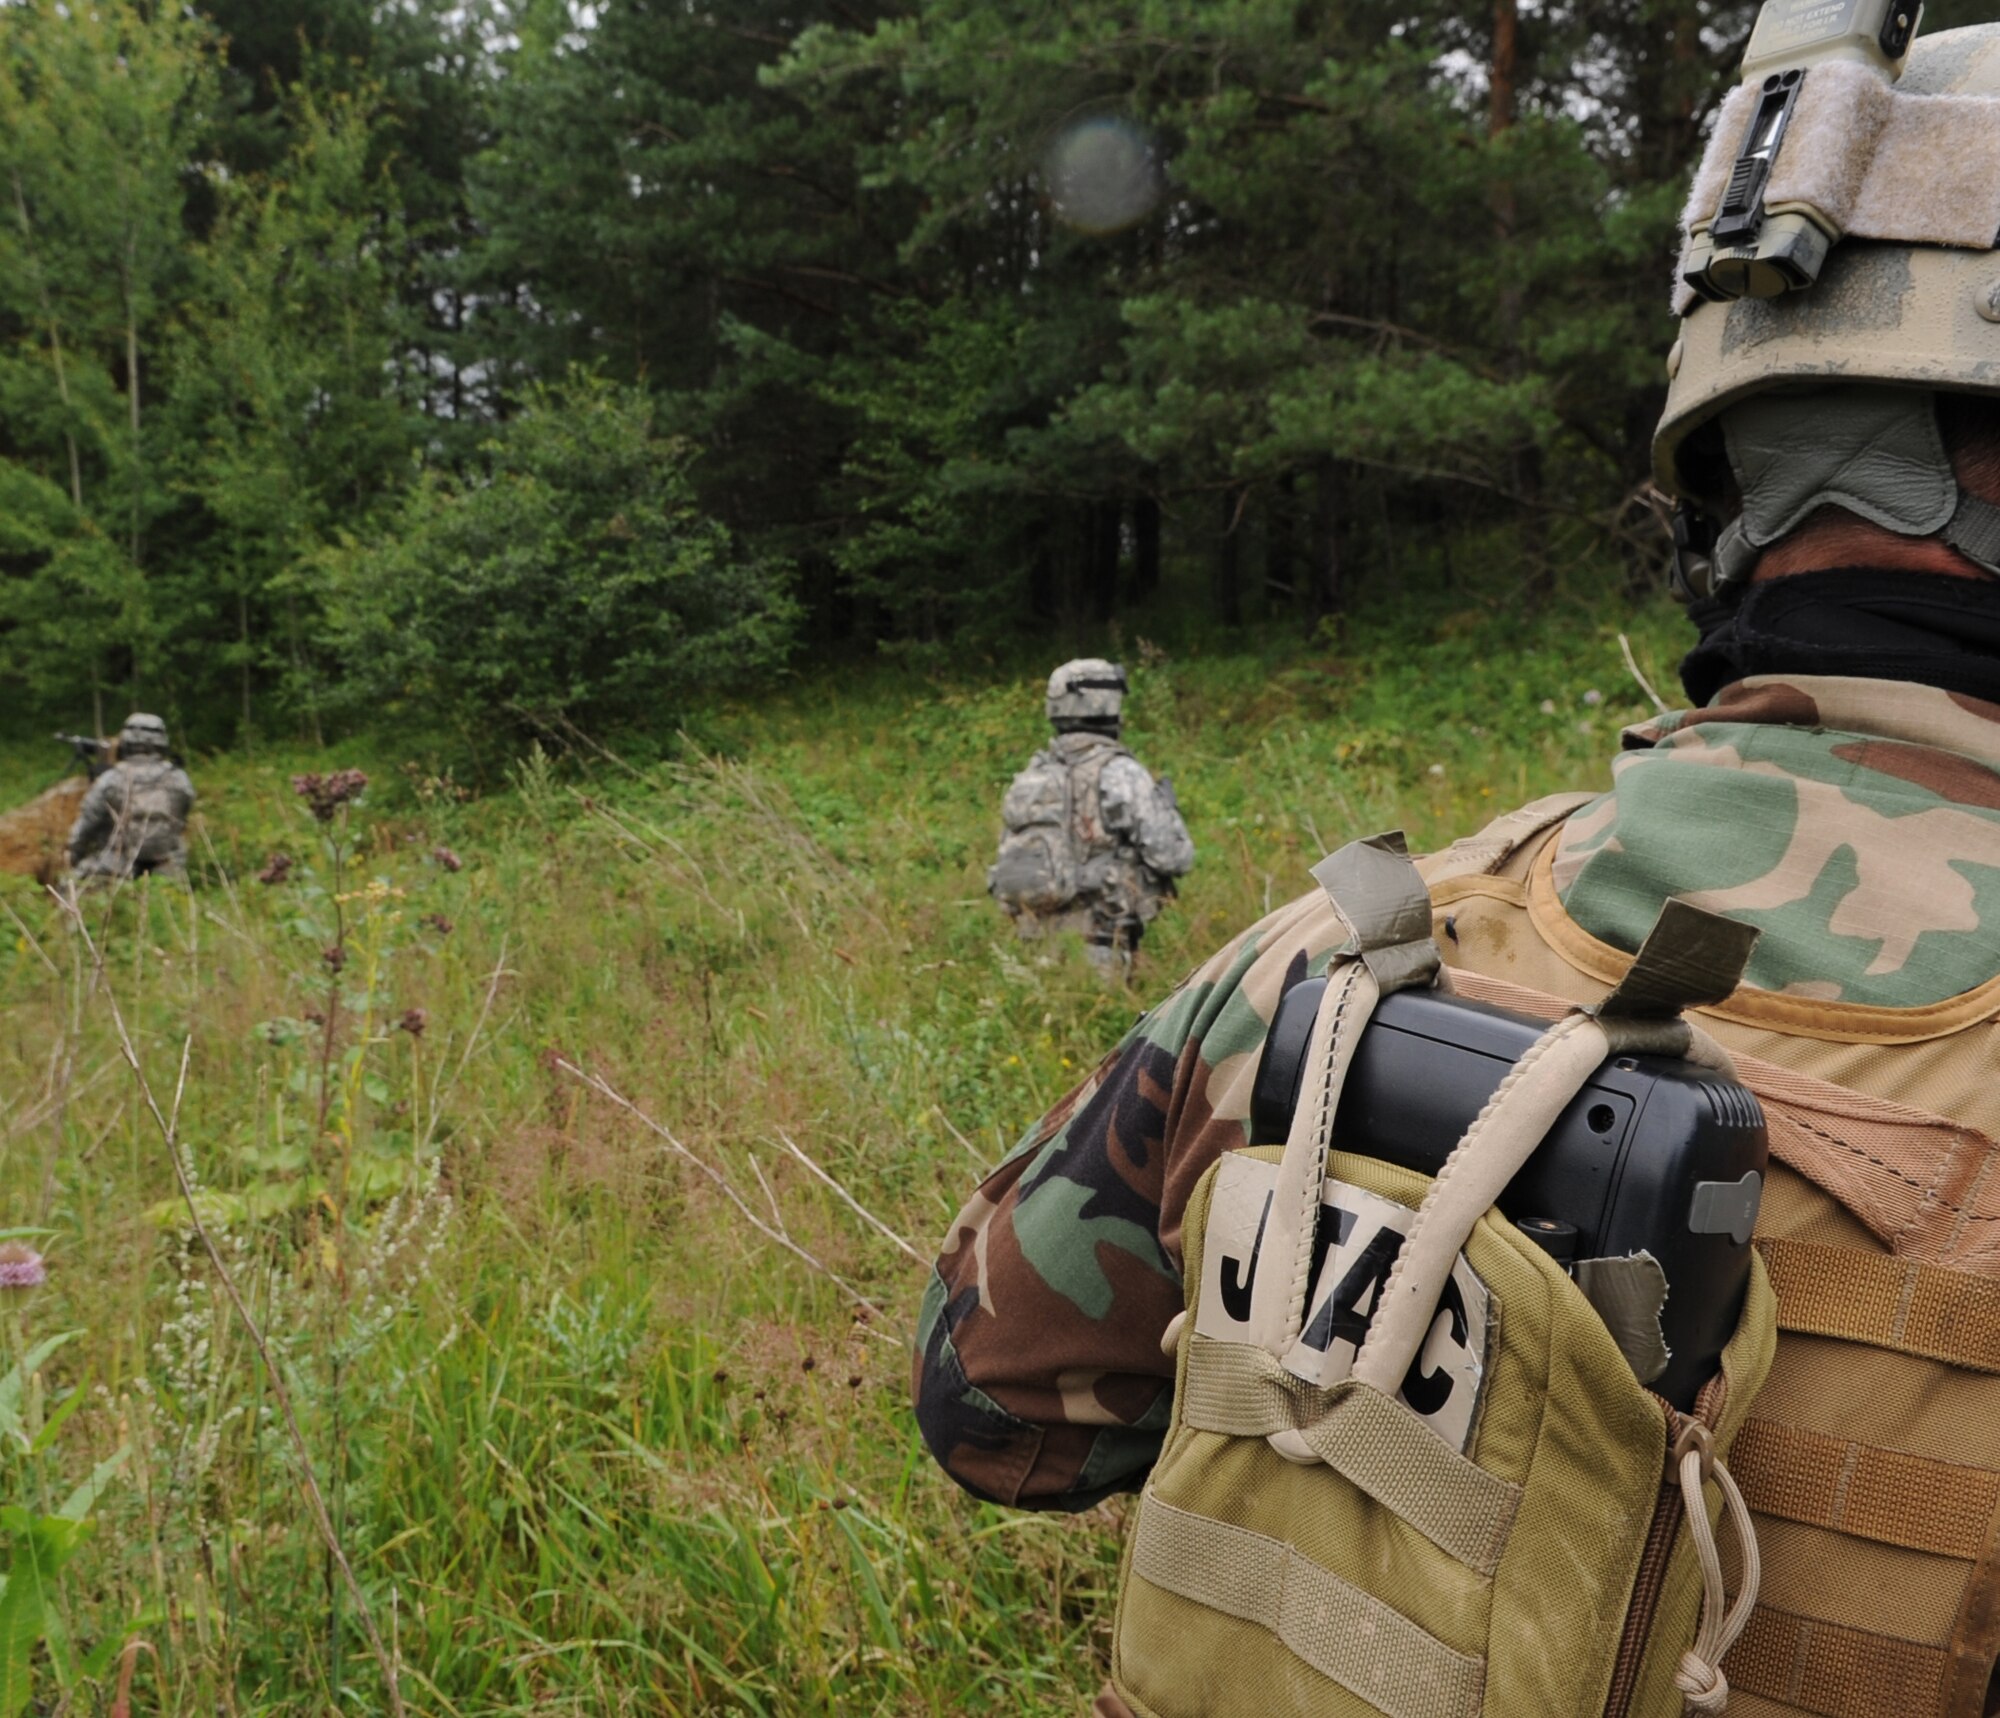 U.S. Air Force, Army and North Atlantic Treaty Organization's (NATO) members walk to set coordinates for an air assault mission scenario during exercise ALLIED STRIKE 10, Hohenfels, Germany, Aug. 3, 2010. AS 10 is Europe's premier close air support (CAS) exercise, held annually to conduct robust, realistic CAS training that helps build partnership capacity among allied North Atlantic Treaty Organization nations and joint services while refining the latest operational CAS tactics. For more ALLIED STRIKE information go to www.usafe.af.mil/alliedstrike.asp. (U.S. Air Force photo by Senior Airman Caleb Pierce)